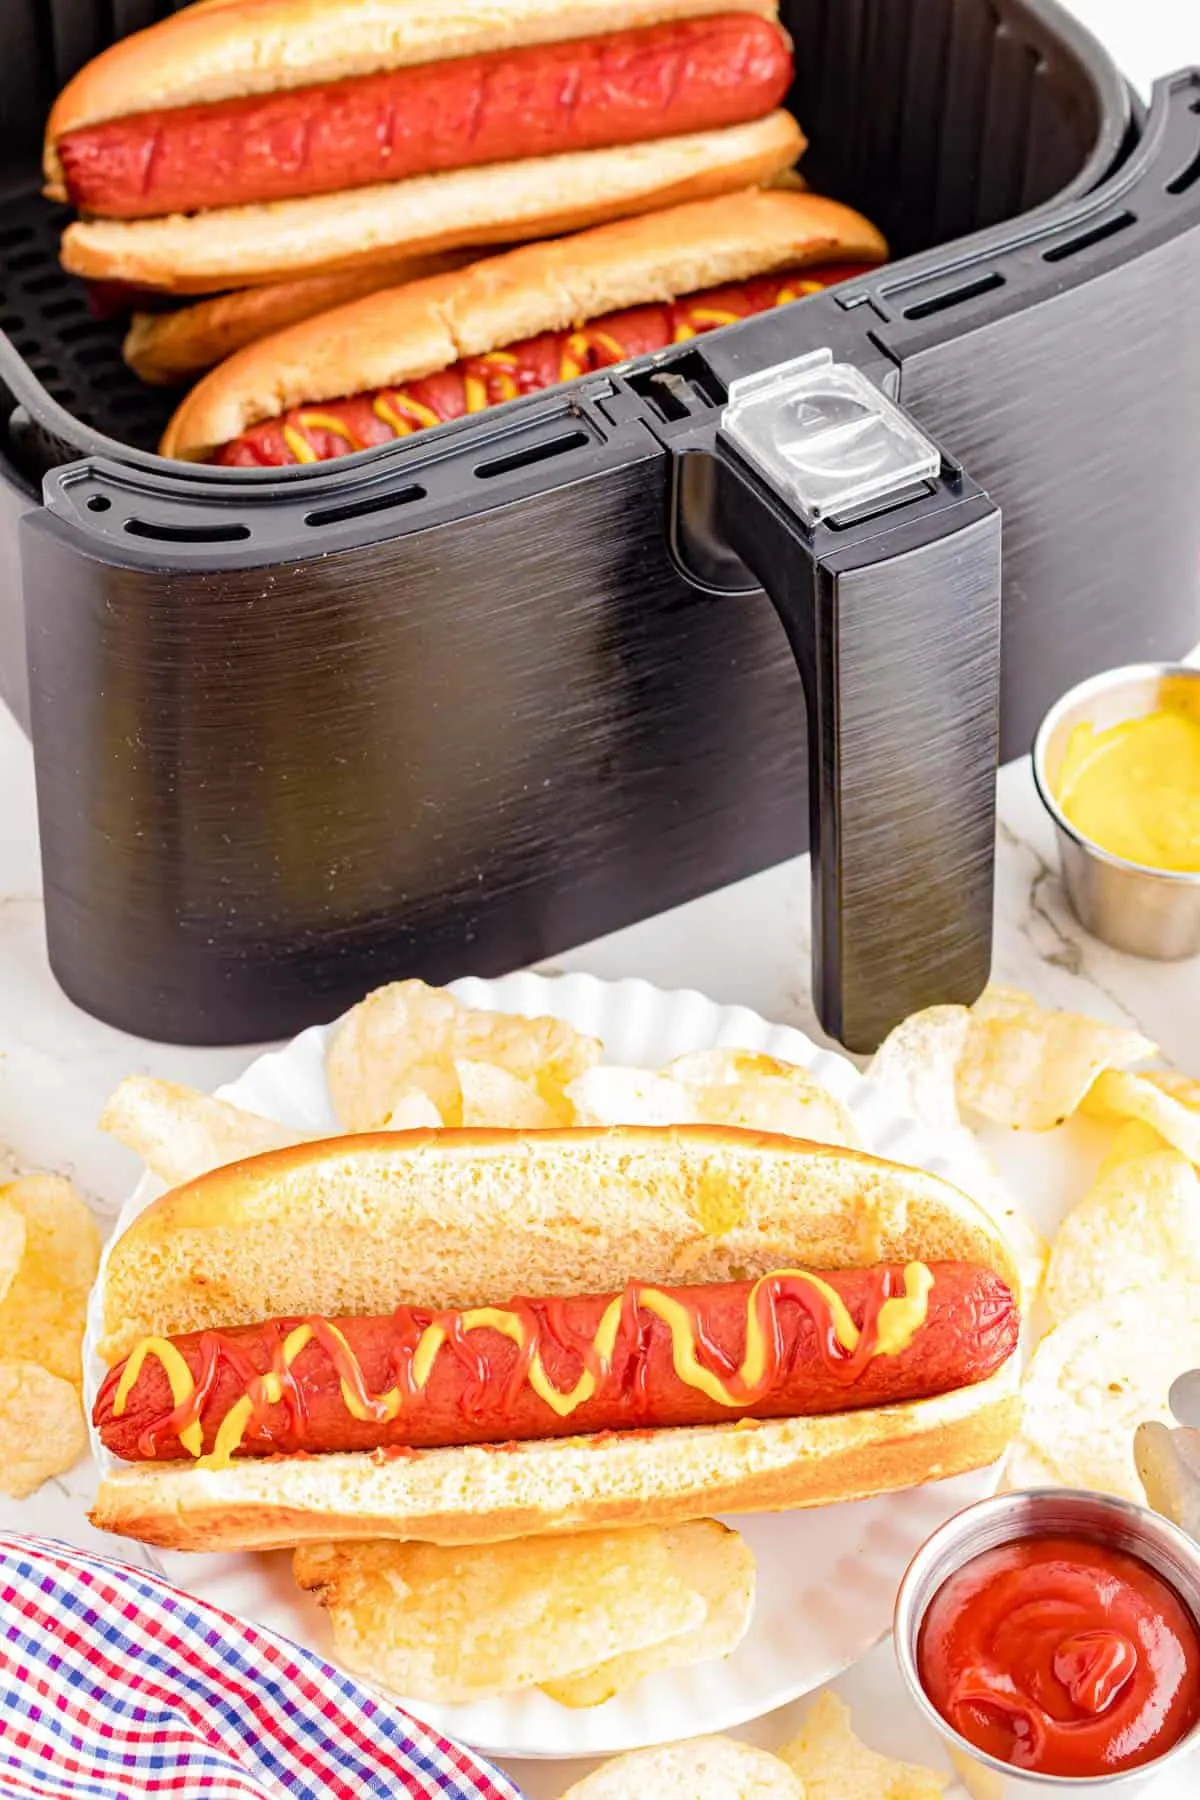 Air Fryer Hot Dogs are a simple and delish lunch or dinner dish the whole family will love.